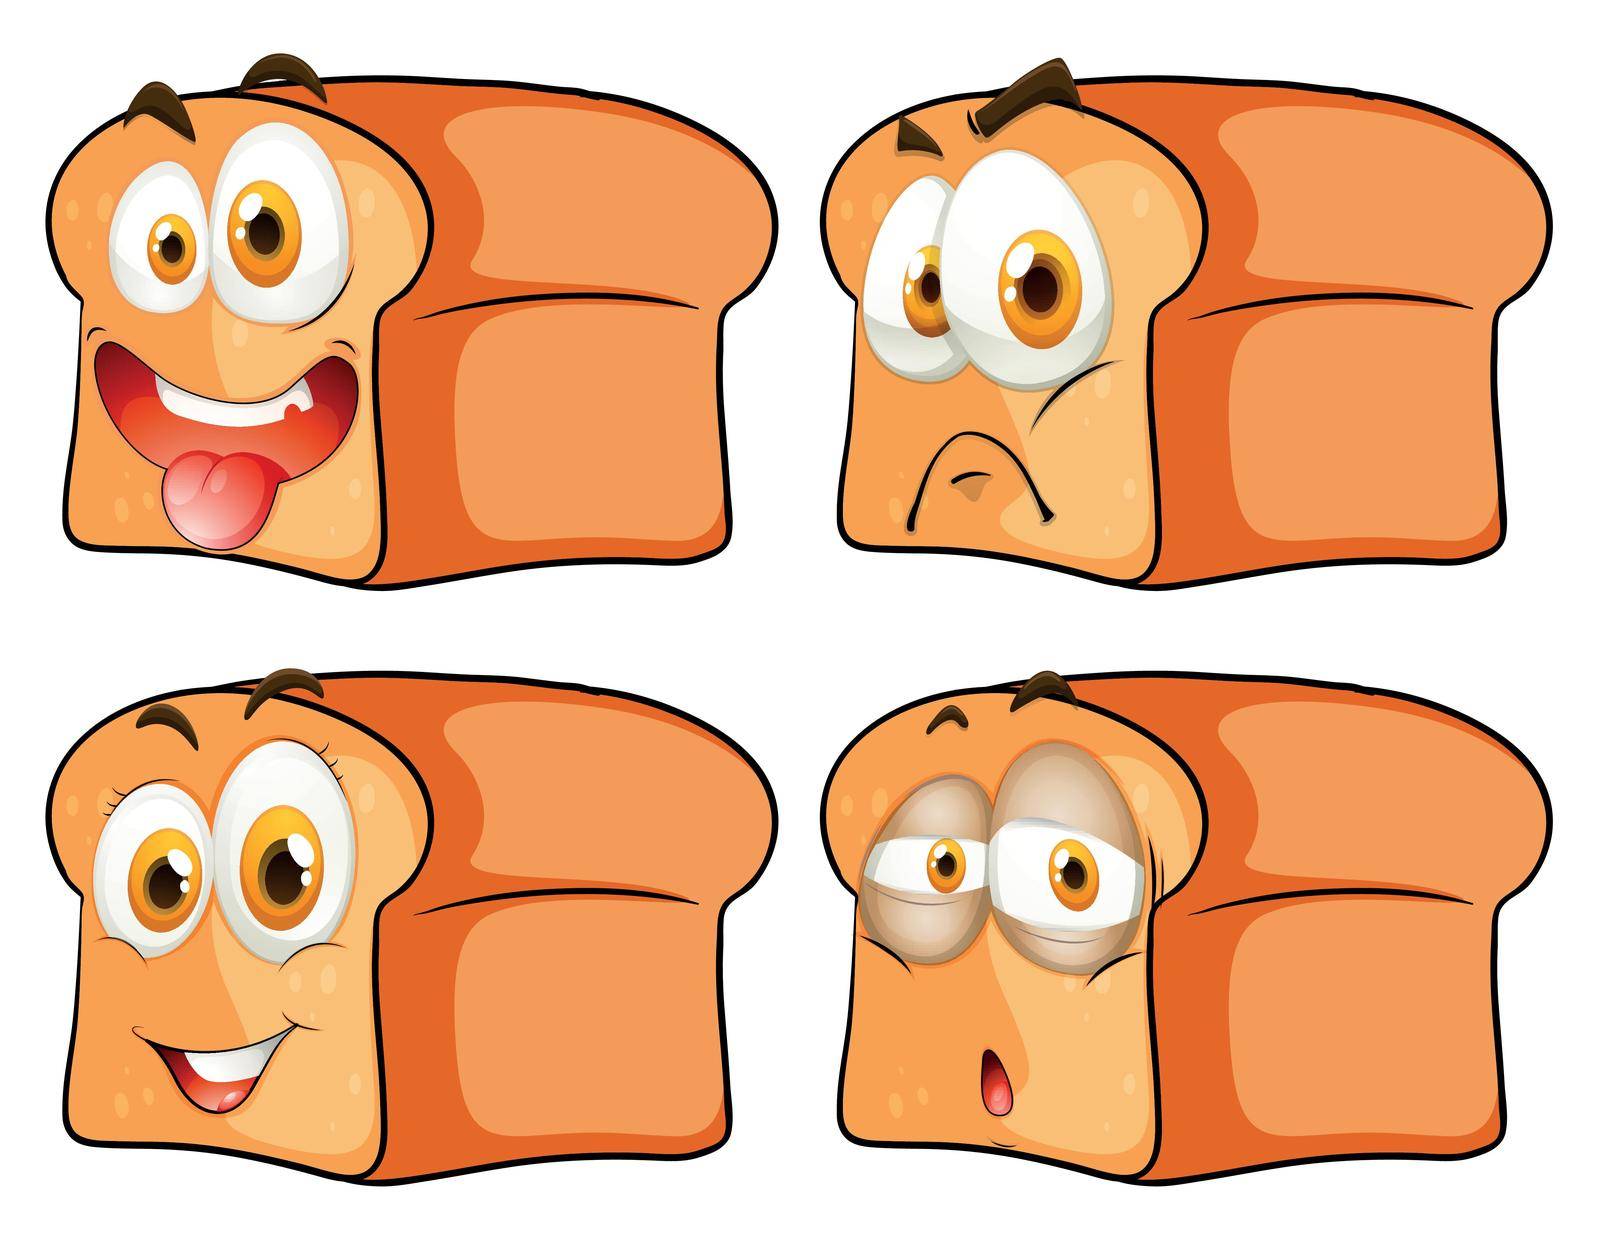 Bread with facial expression by iimages